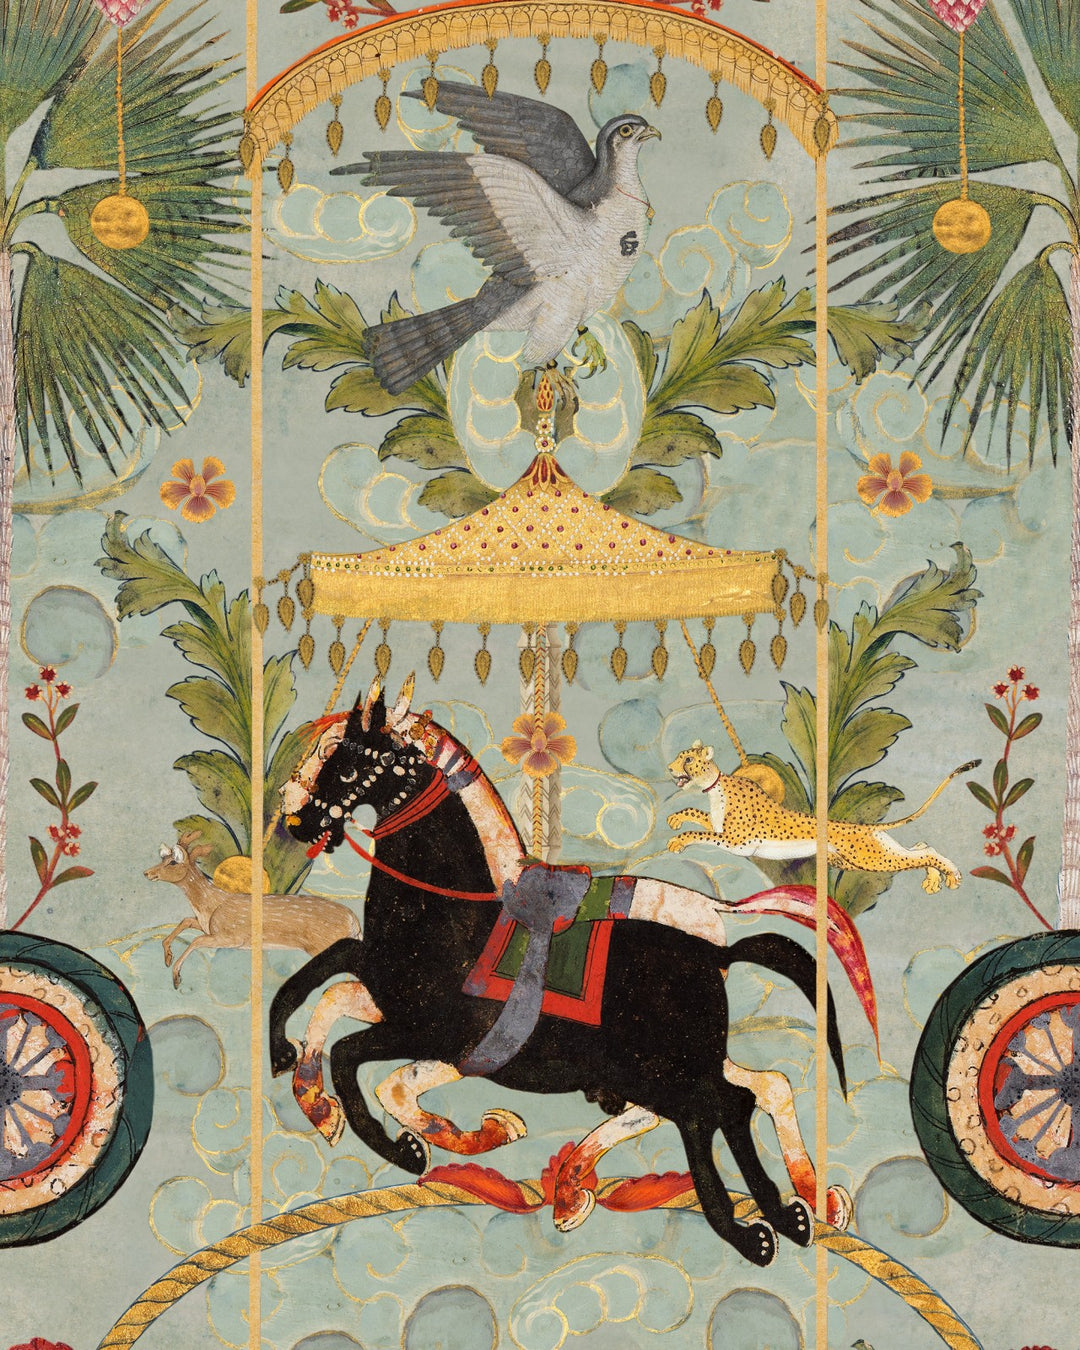 Mind-the-gap-tales-of-Maghreb-collection-wallpaper-Yennayer-agate-print-pracing-horses-decorations-birds-beasts-carnival-wallpaper-print-Indian-Themed-